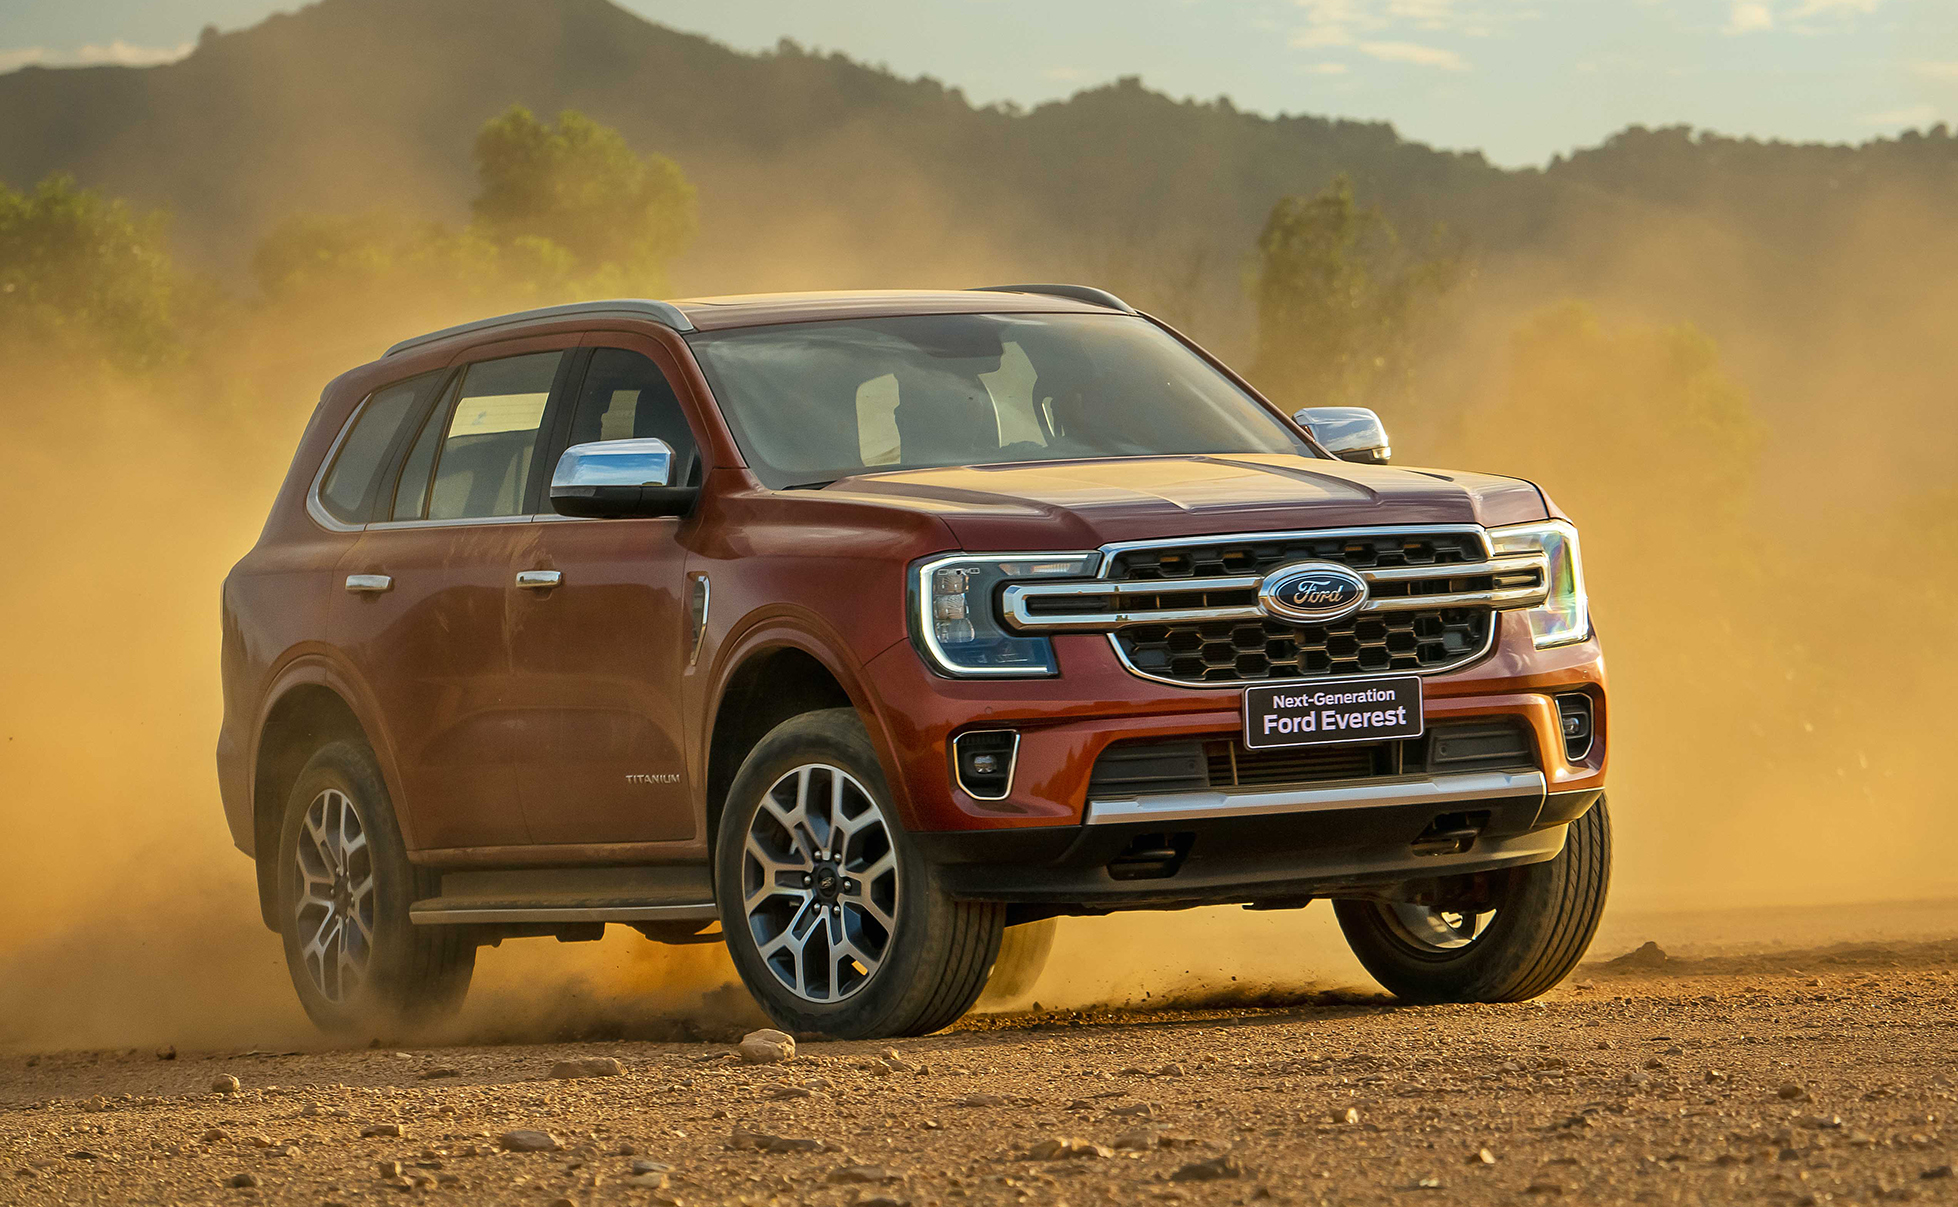 A series of advantages of the new generation Ford Everest’s intelligent lighting system